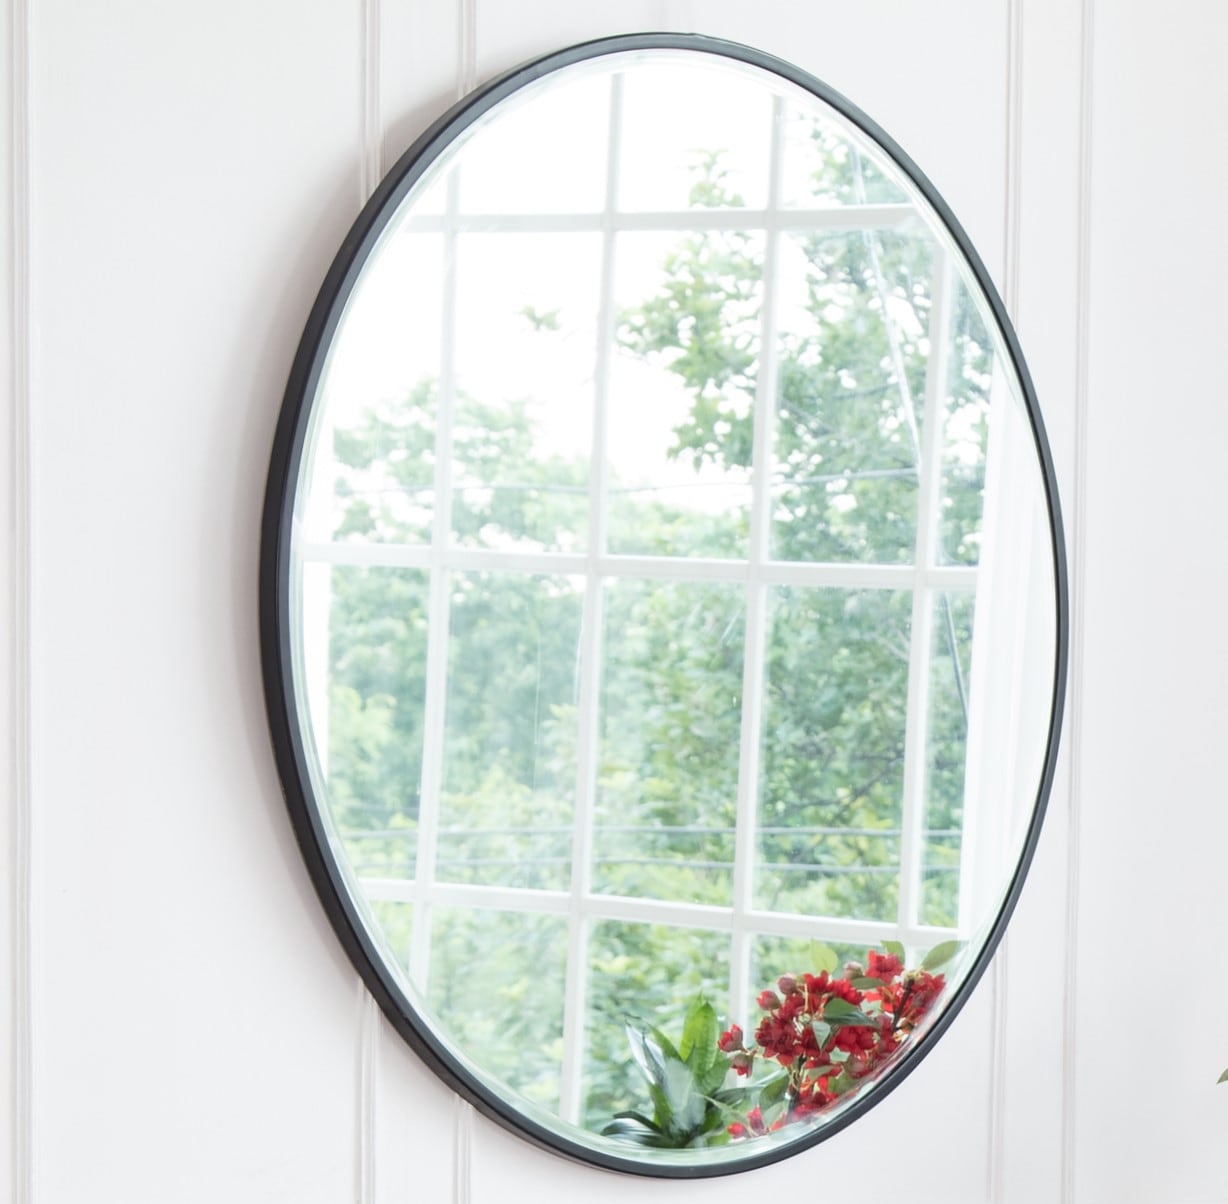 MH LONDON Wall Mounted Mirror 36-in W x 36-in H Round Black Powdercoat ...